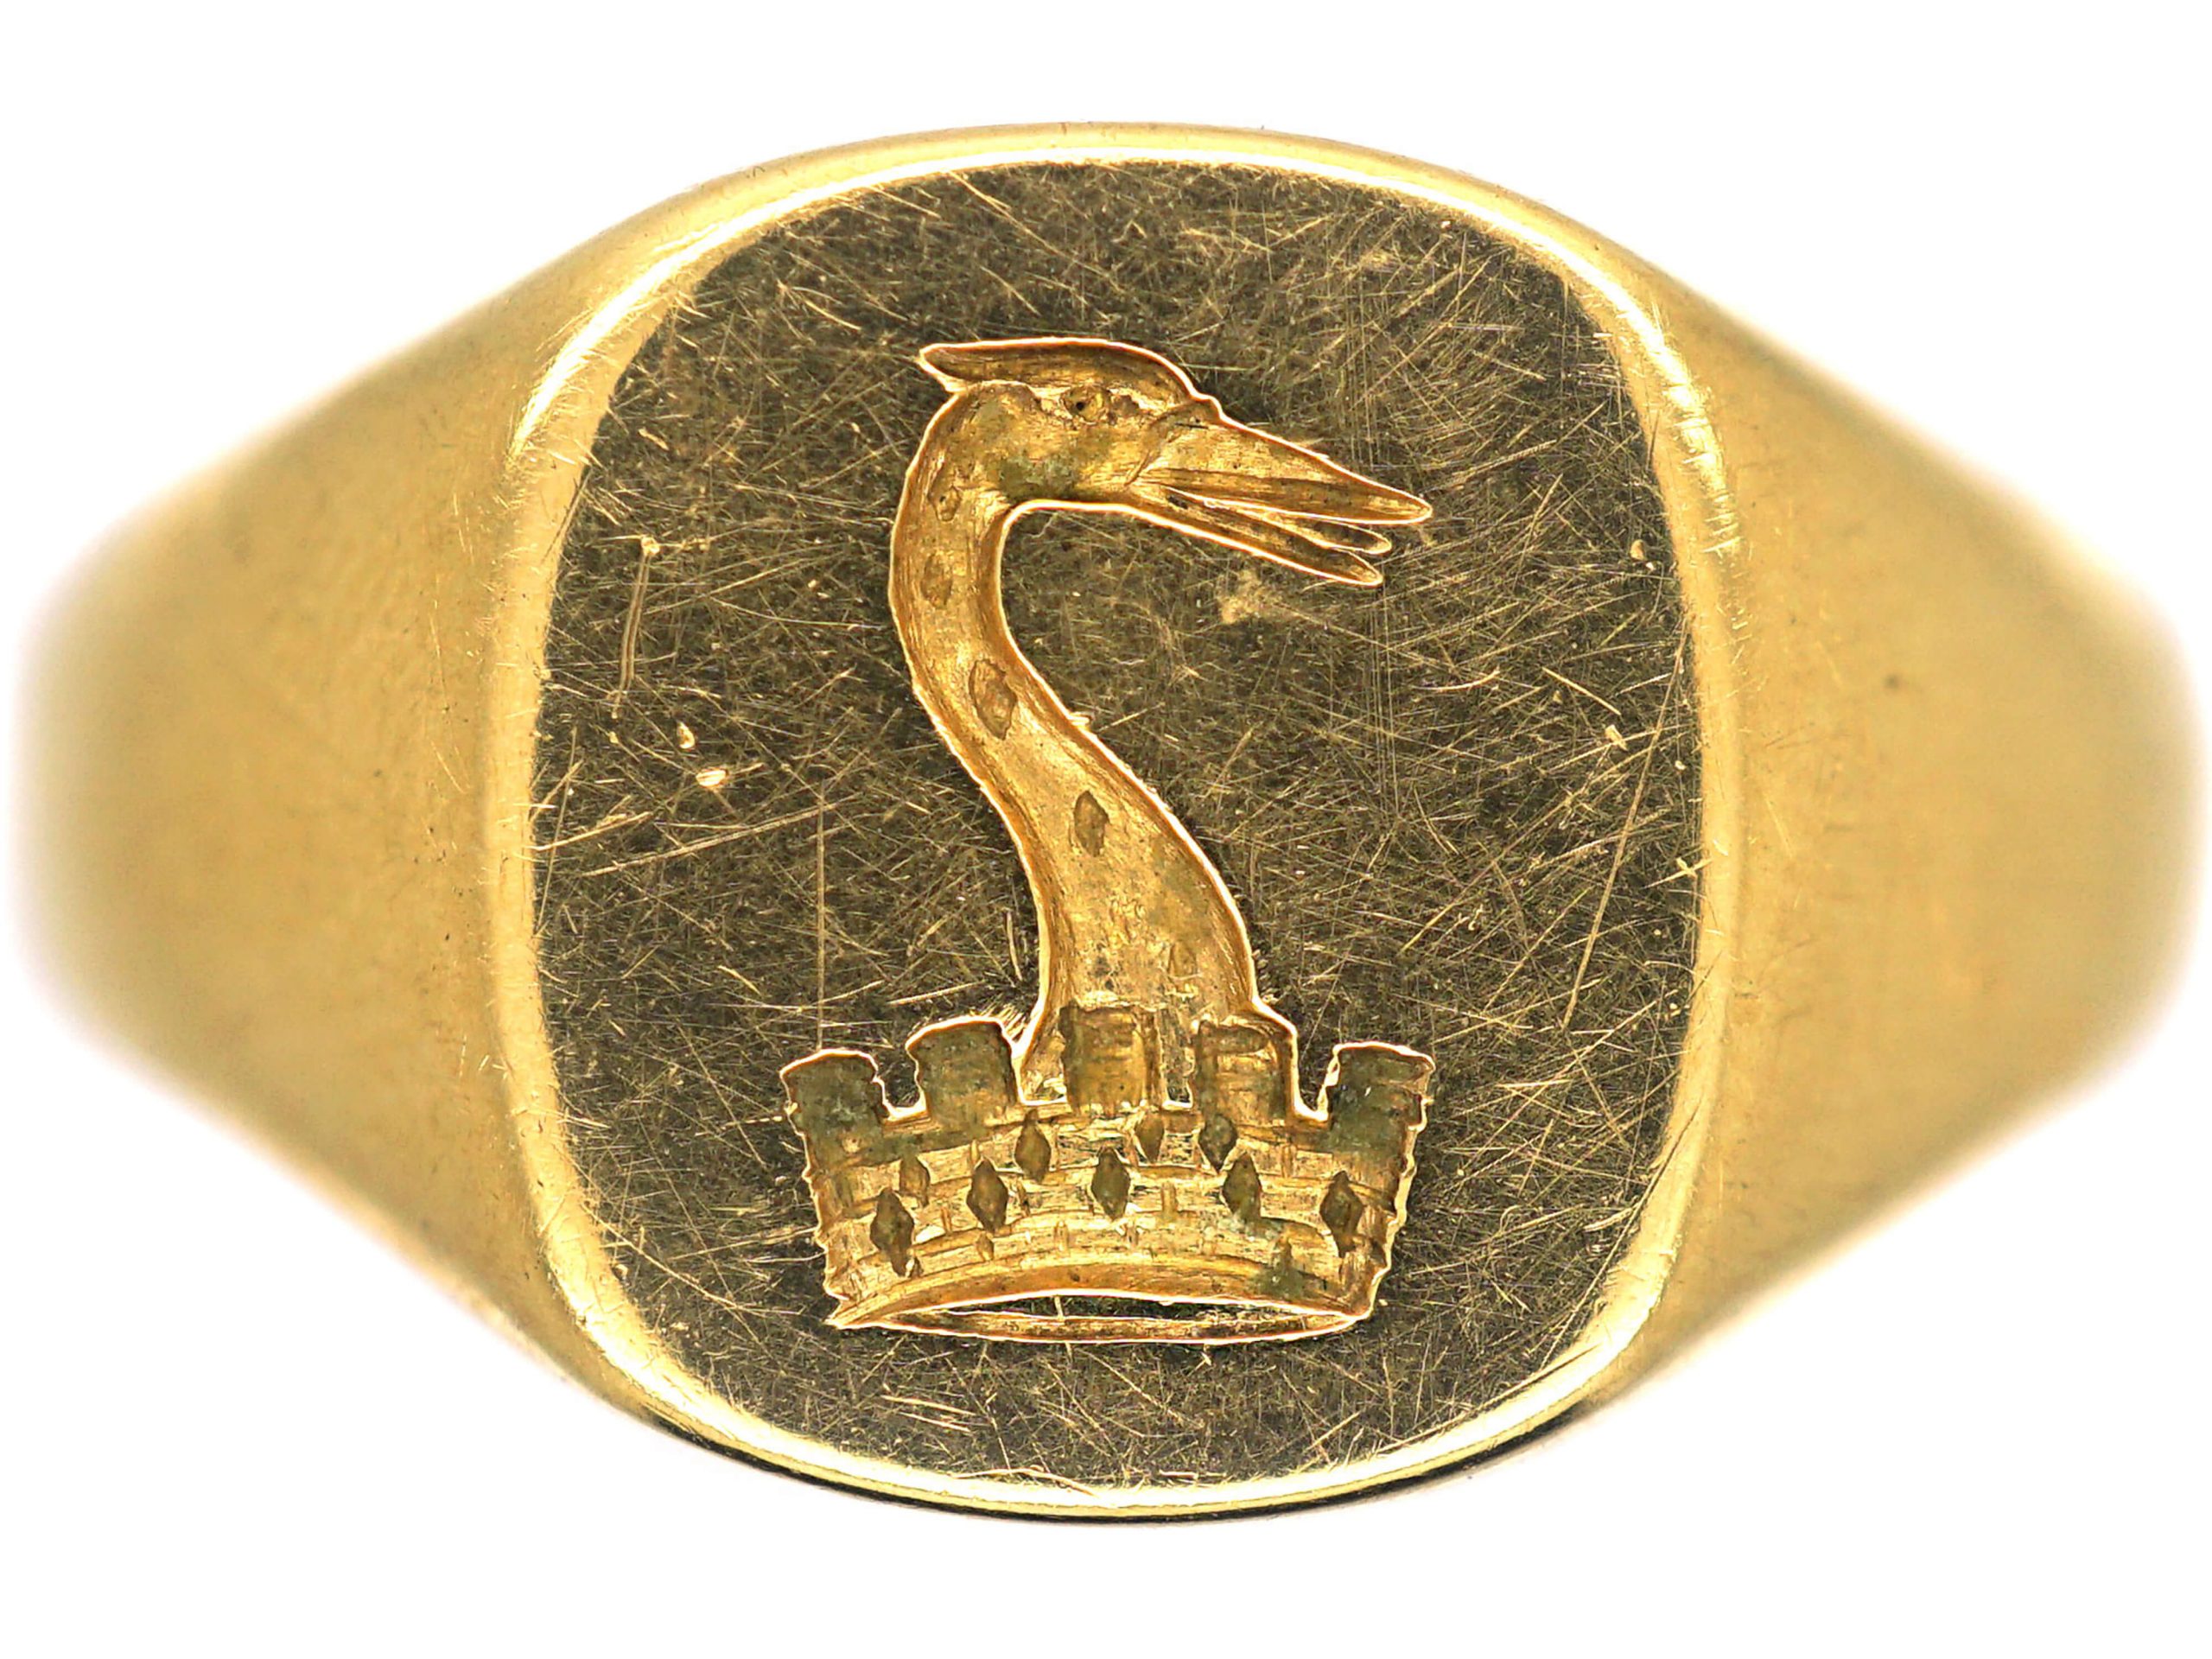 Edwardian 18ct Gold Ring with a Heraldic Crest of a Pelican and a Crown